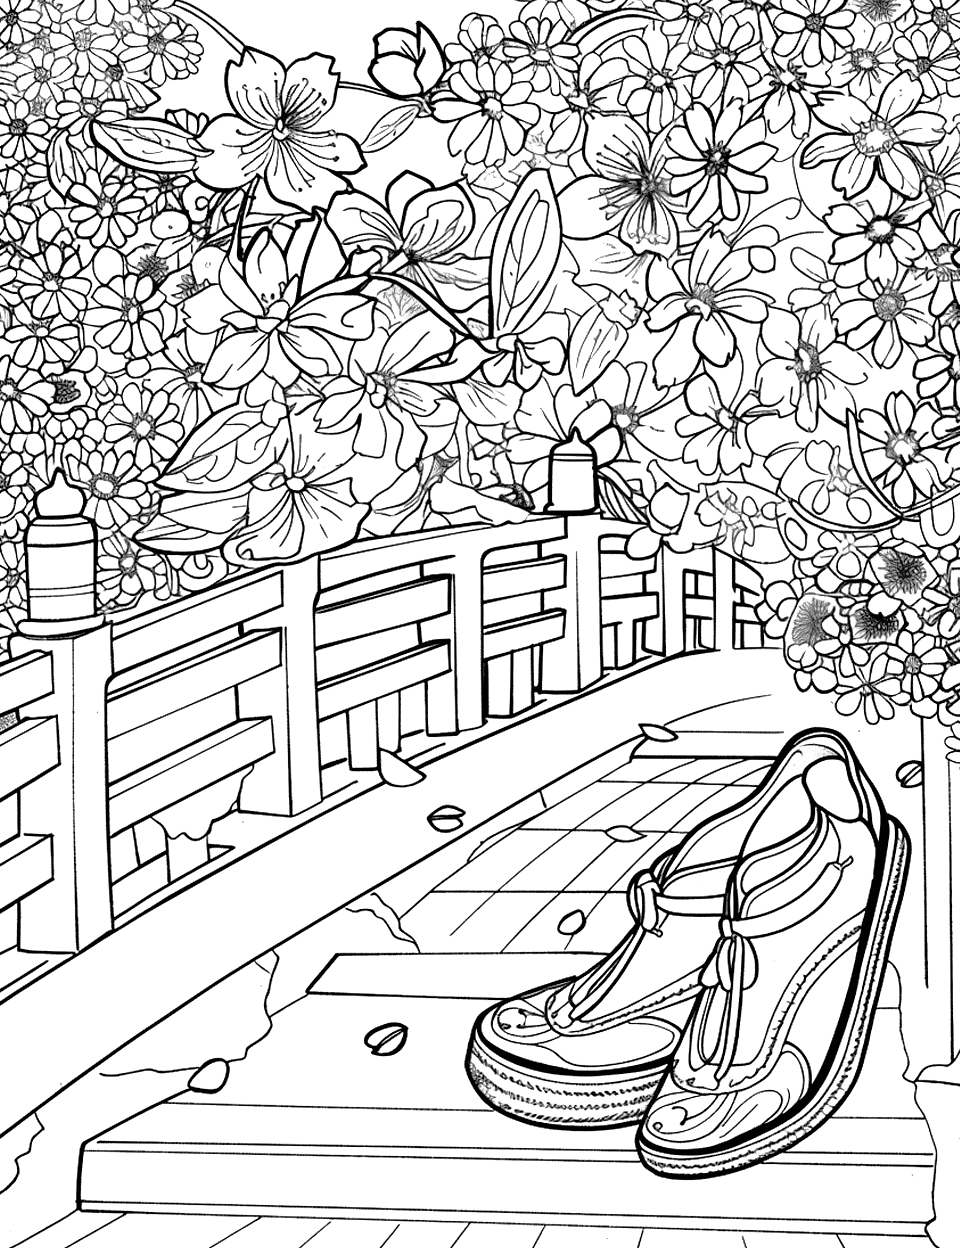 Geisha Footwear in a Garden Shoe Coloring Page - Traditional geisha footwear with cherry blossoms and a small bridge.